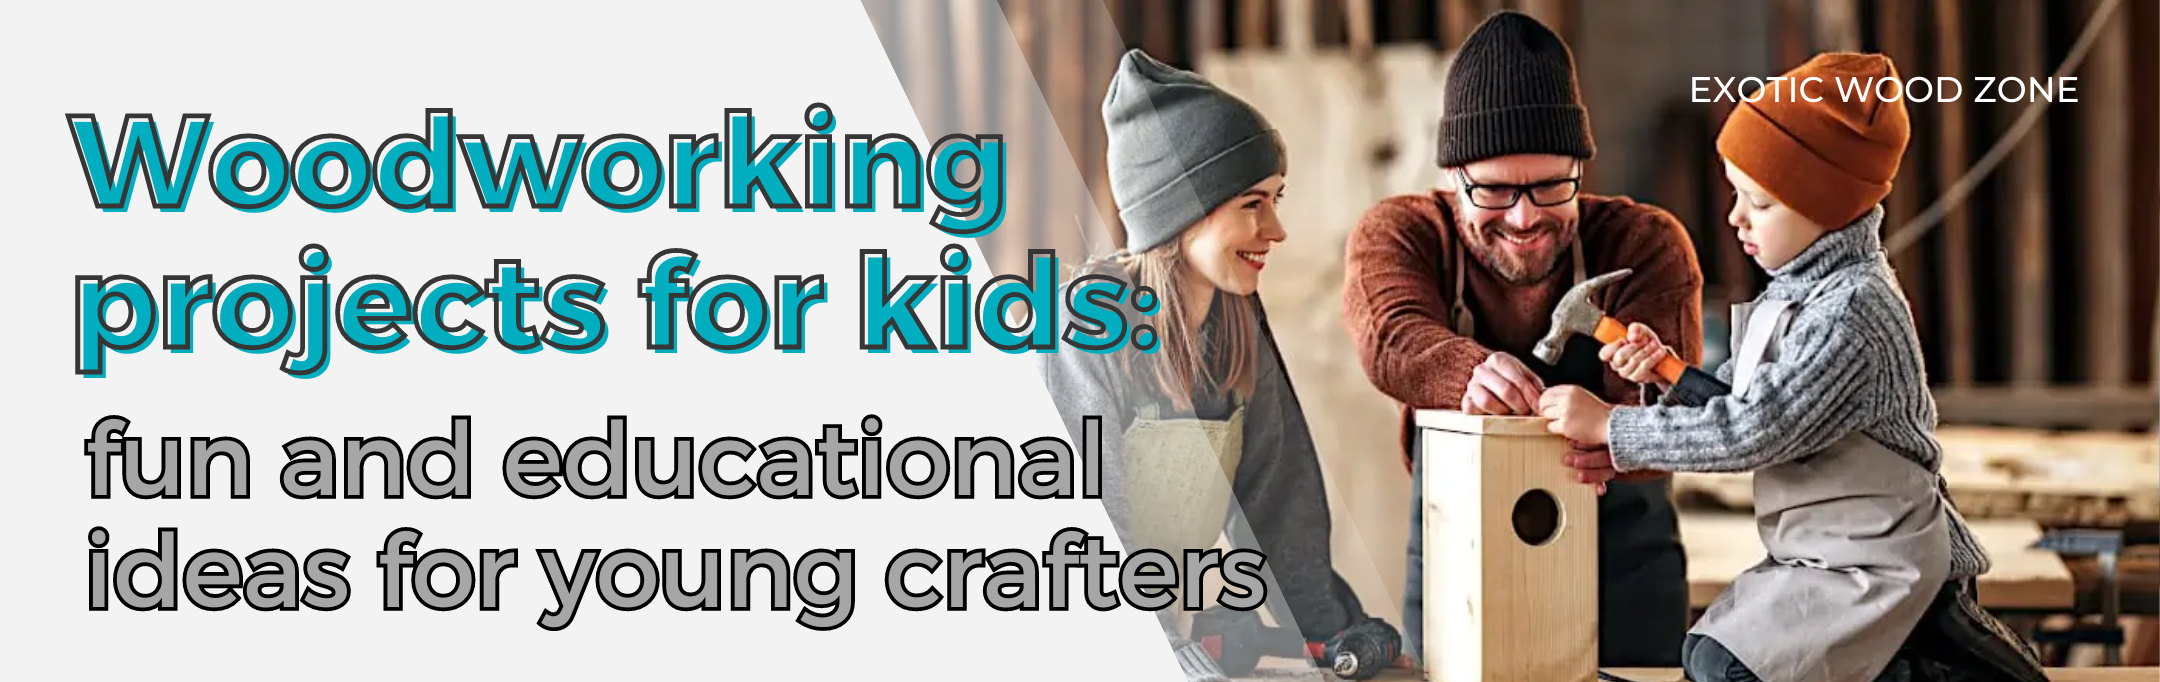 Woodworking Projects for Kids: Fun and Educational Ideas for Young Crafters